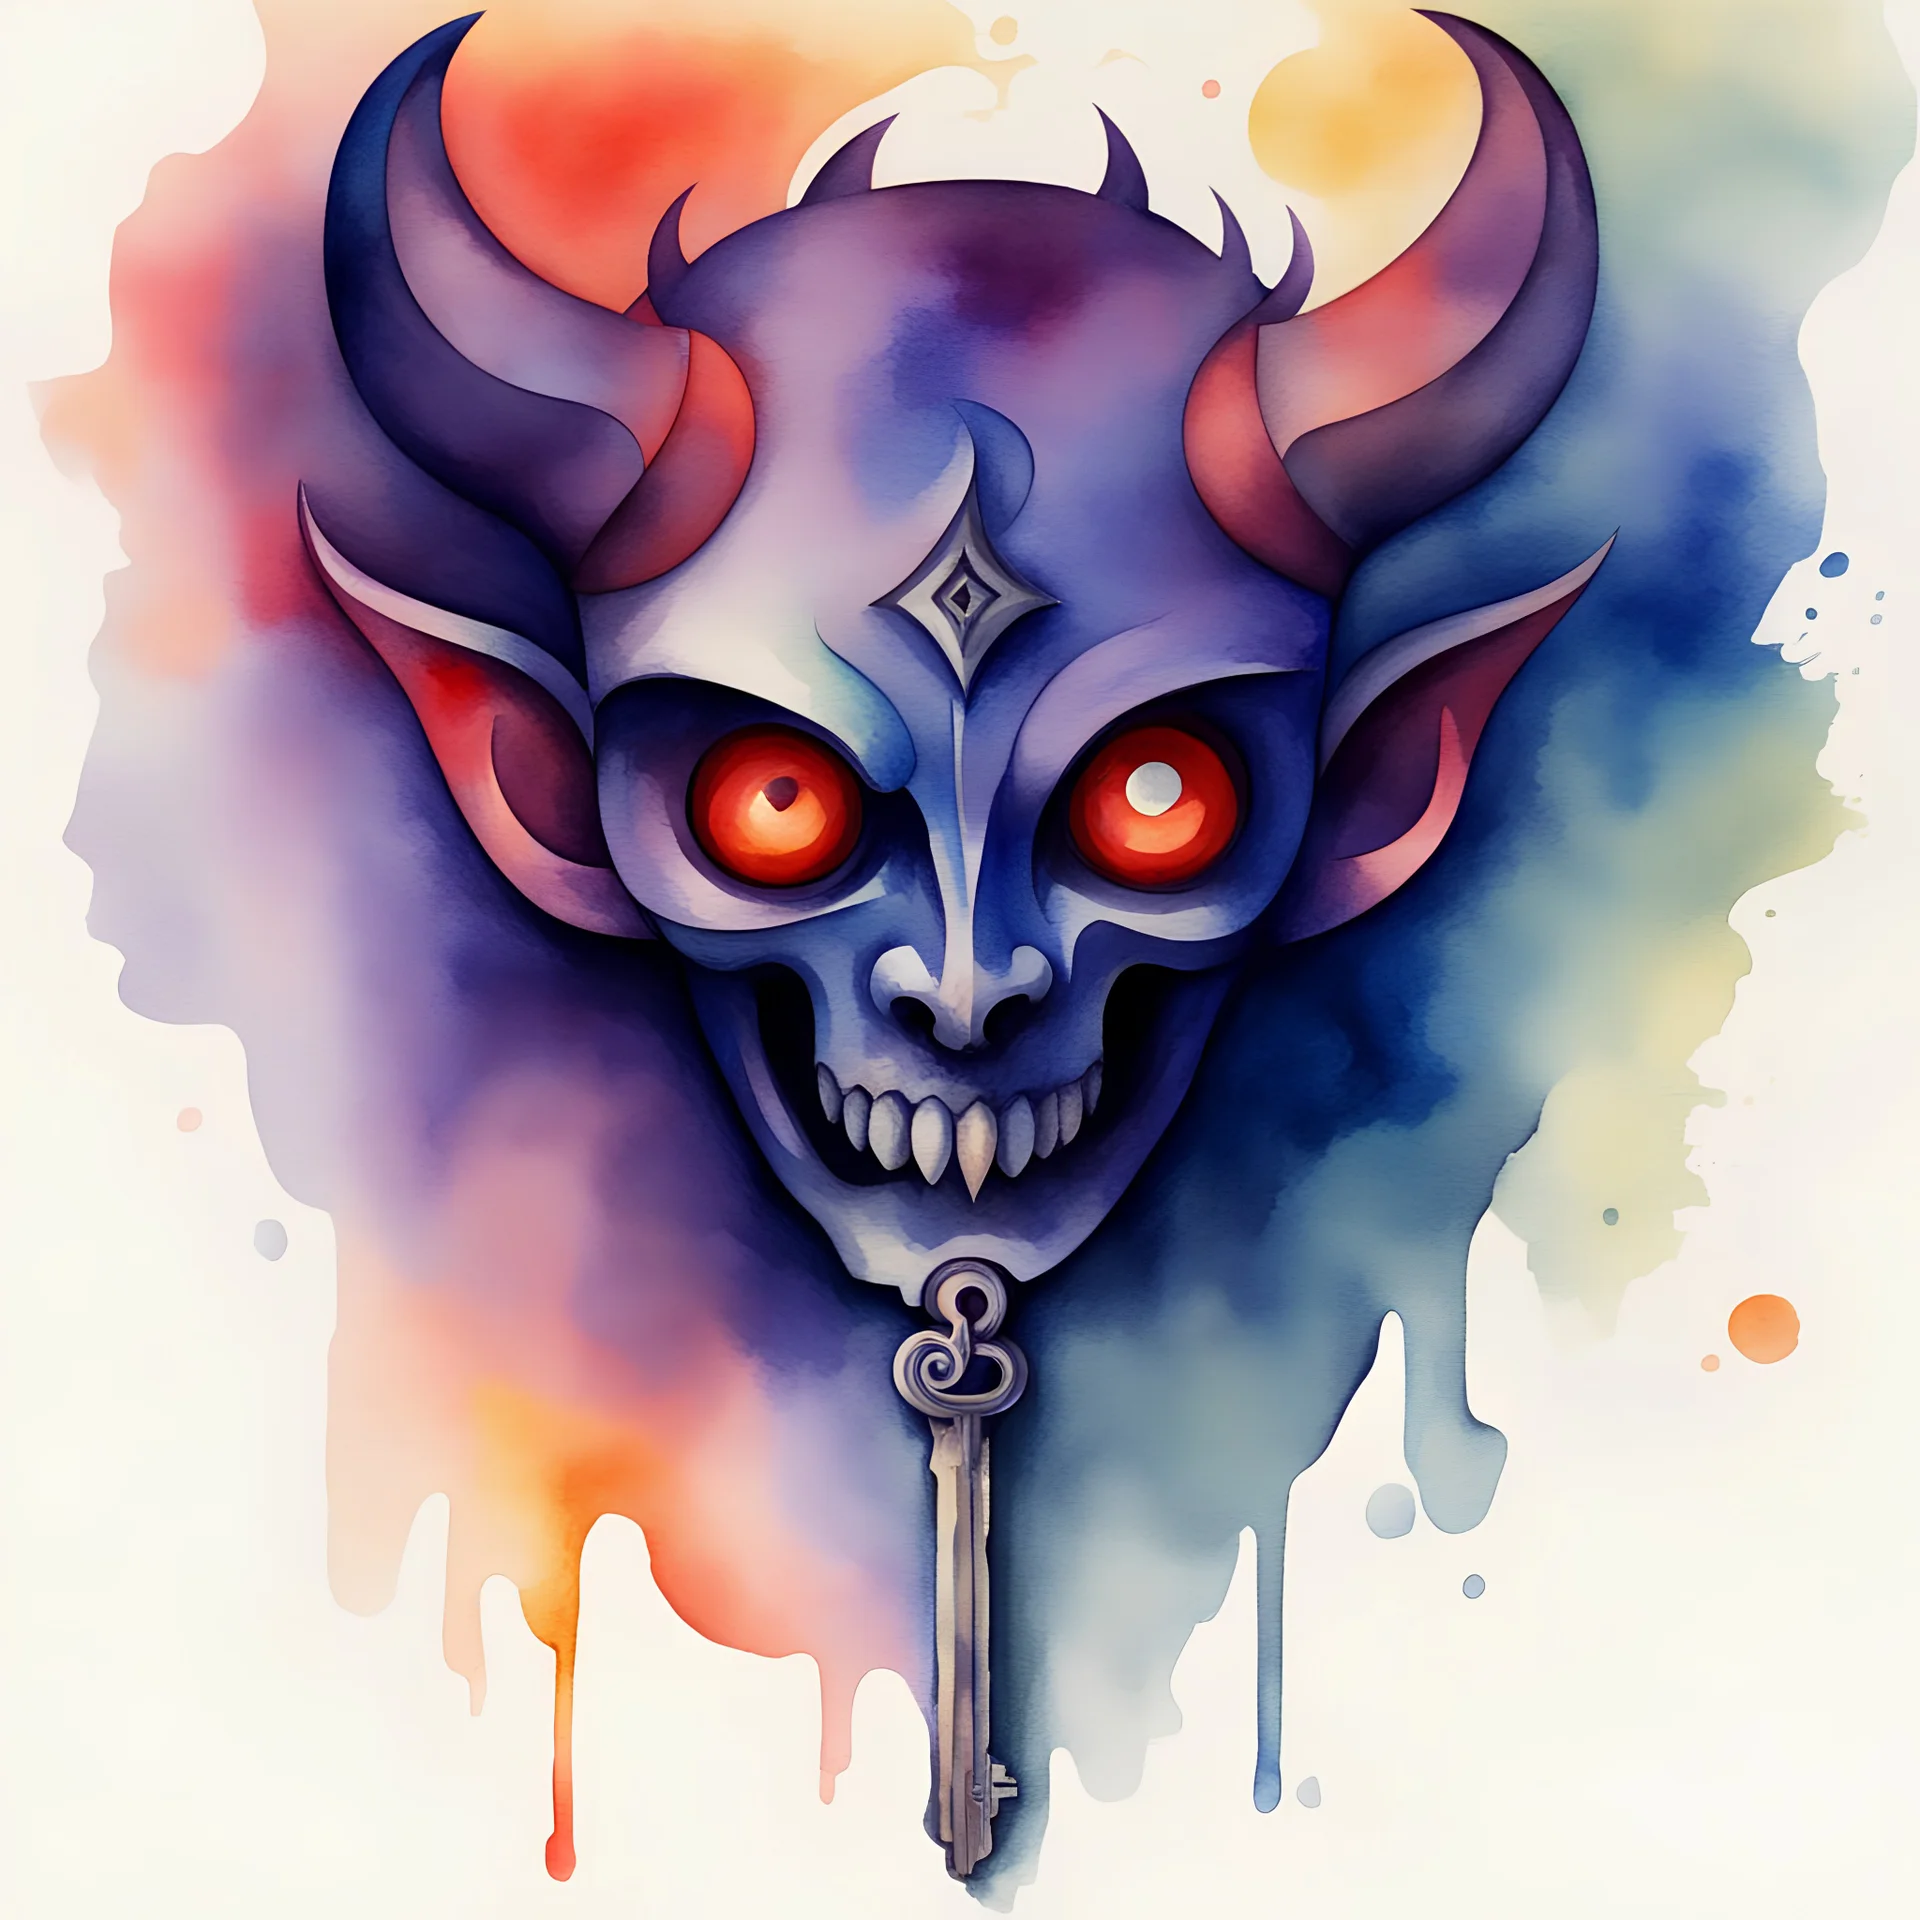 Demon Key in watercolor painting precisionism art style